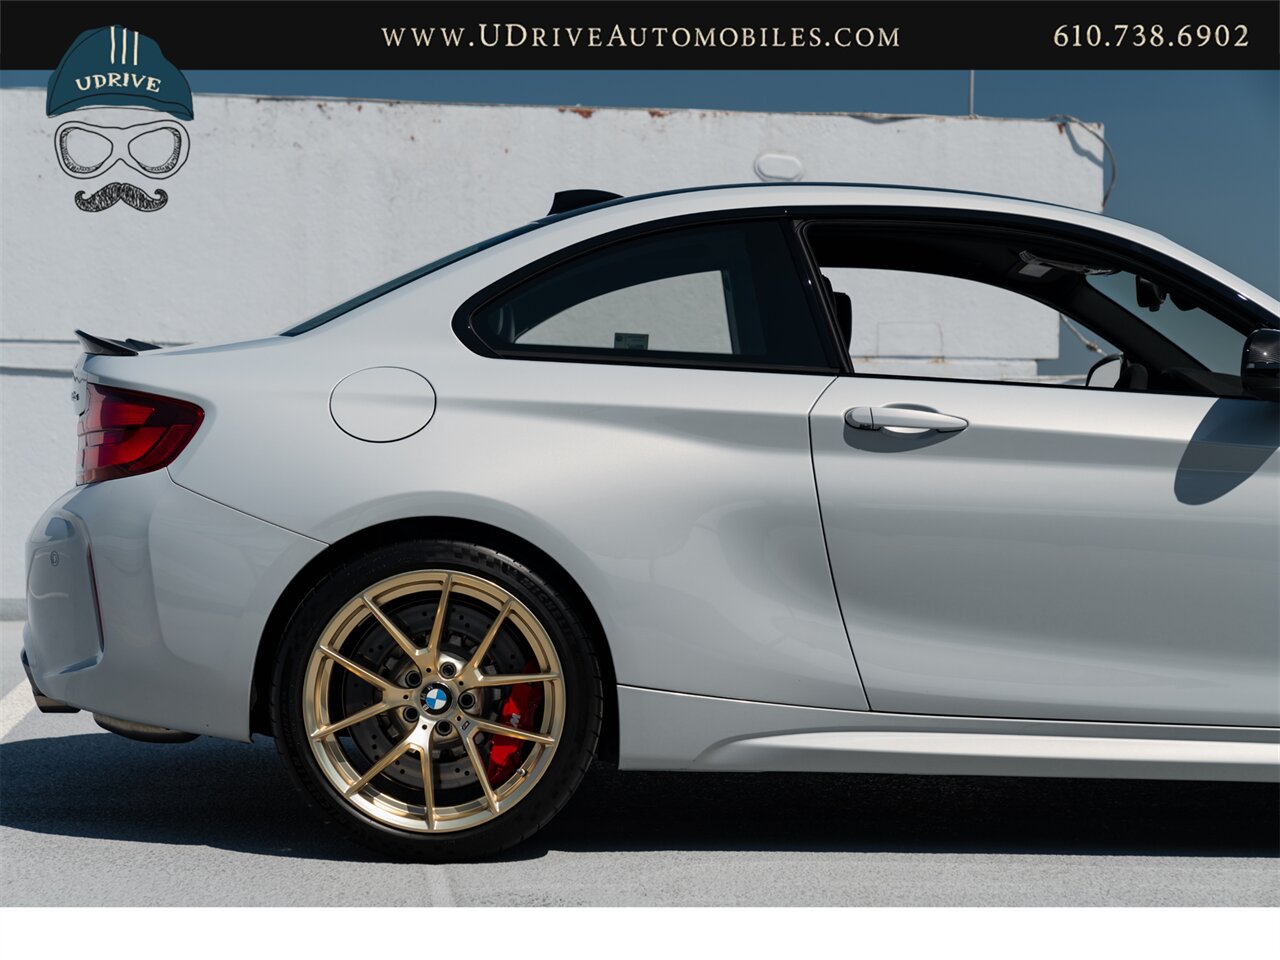 2020 BMW M2 CS  M2 CS 6 Speed Manual 2k Miles Full Body PPF Factory Warranty until 2025 - Photo 18 - West Chester, PA 19382